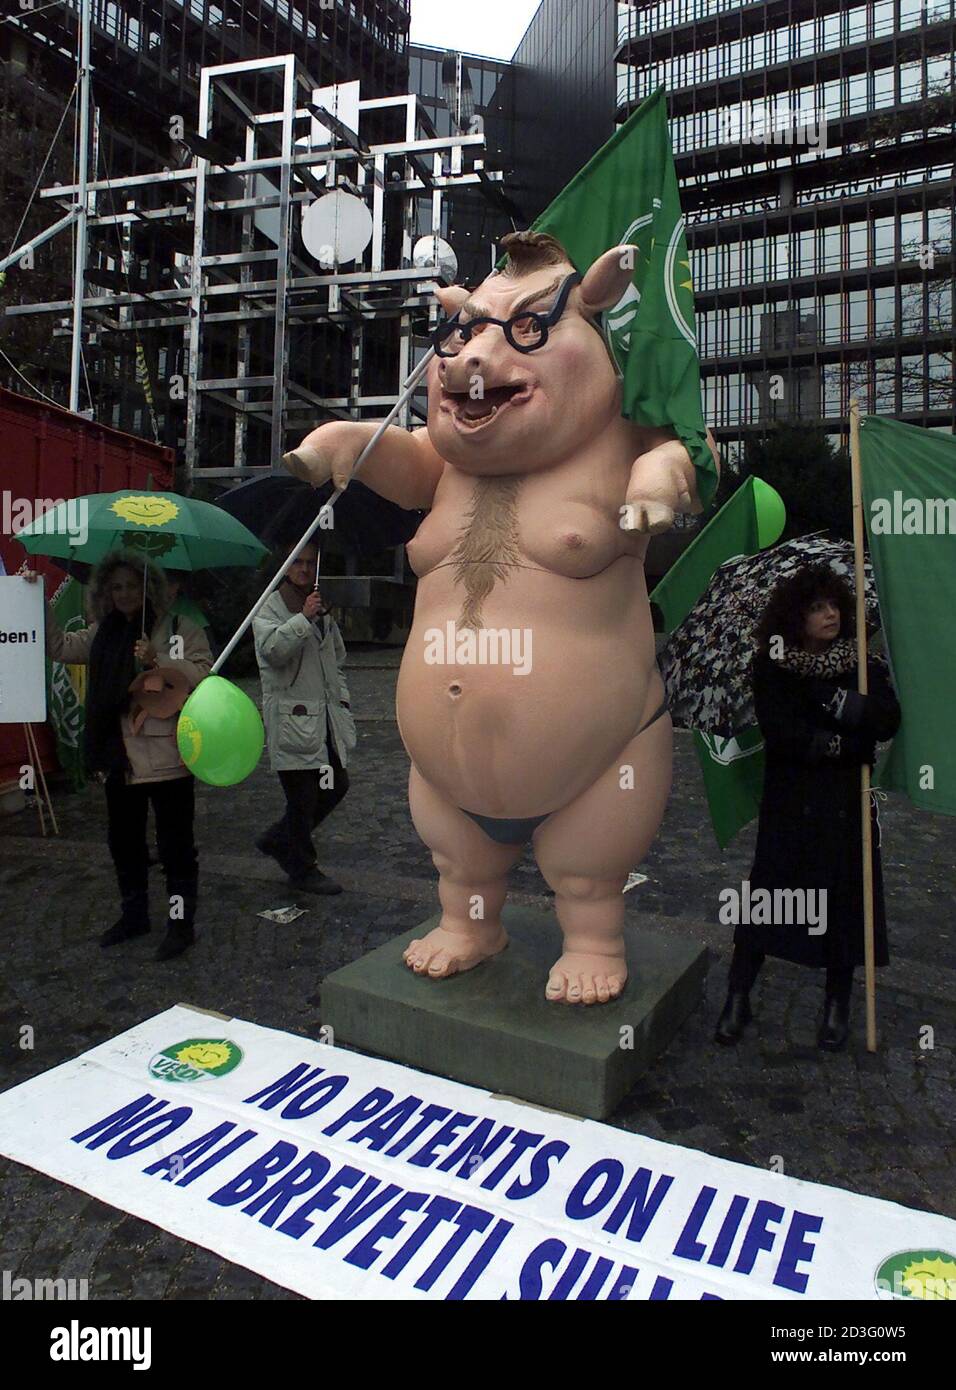 Members of the Italian green party Verdi protest against patents for a technique to cross humans and animals in front of the European Patent Office in Munich November 21, 2000. The Australian company Amrad has been awarded a patent for a technique to cross humans and animals. Mice, birds, sheep, pigs, cattle, goats and even fish could be used for the so-called chimera creatures. German Greenpeace campaigners discovered the patent had been registered last year with the European Patent Office. The patent includes processes to grow embryo cells from people and animals.  MAD Stock Photo